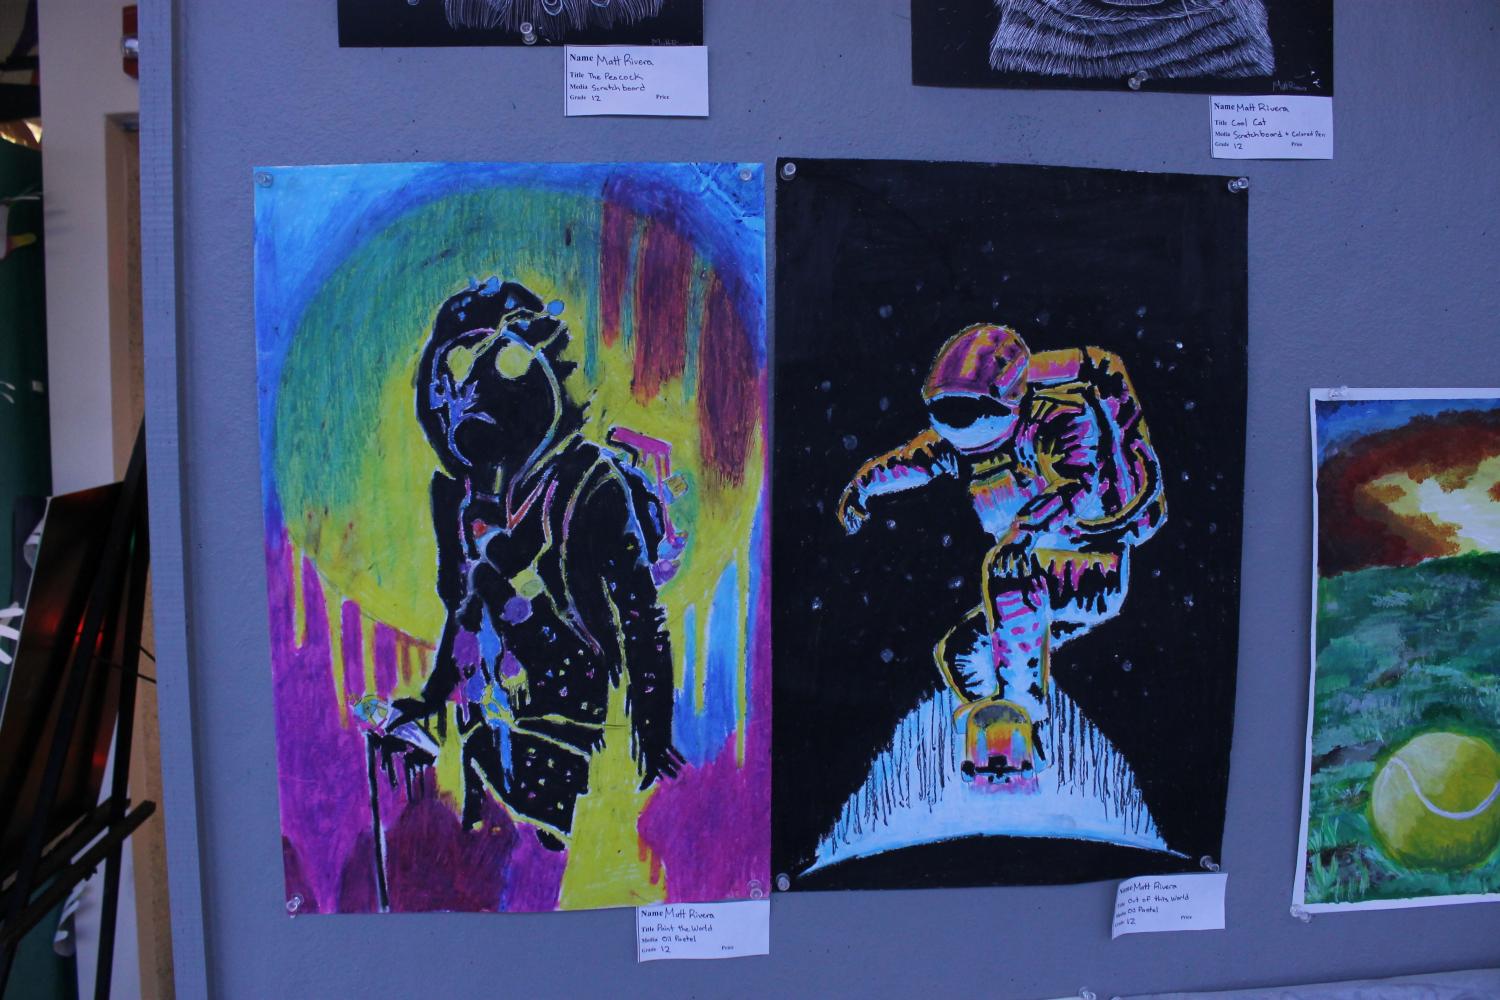 Matt Riveras pieces, Paint the World and Out of this World, were both done with oil pastel.